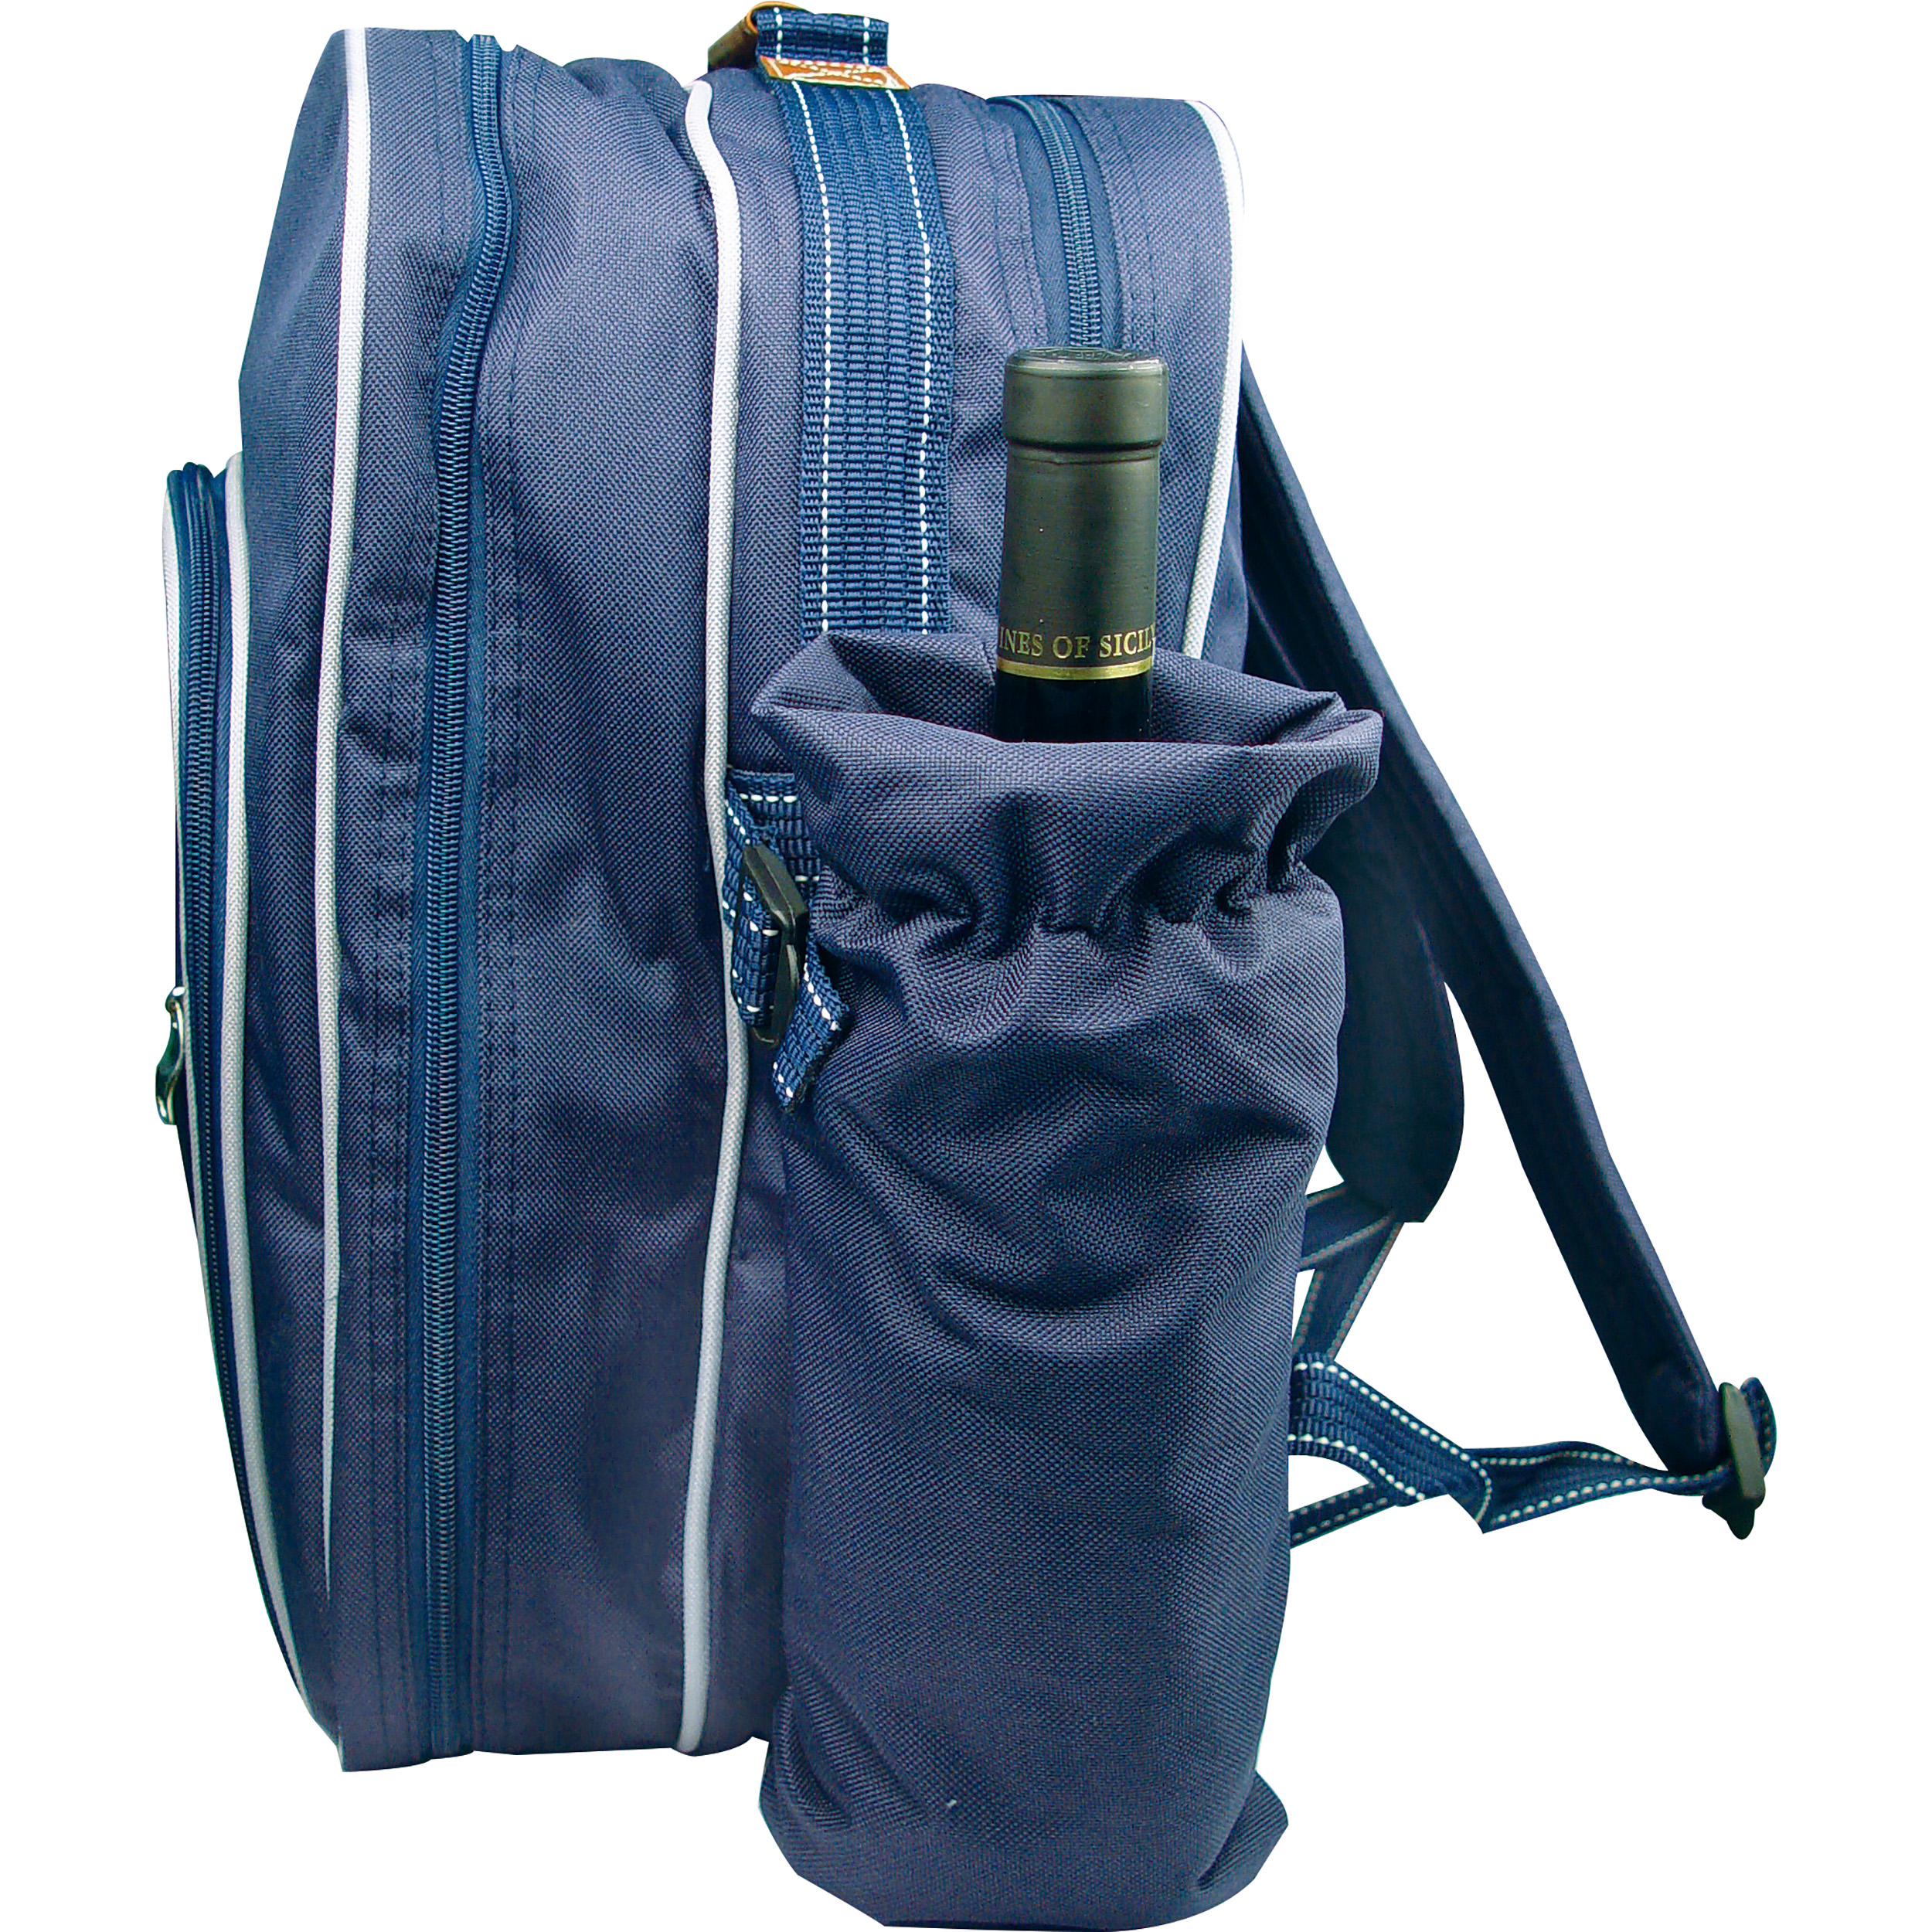 Picknic backpack for 4 persons